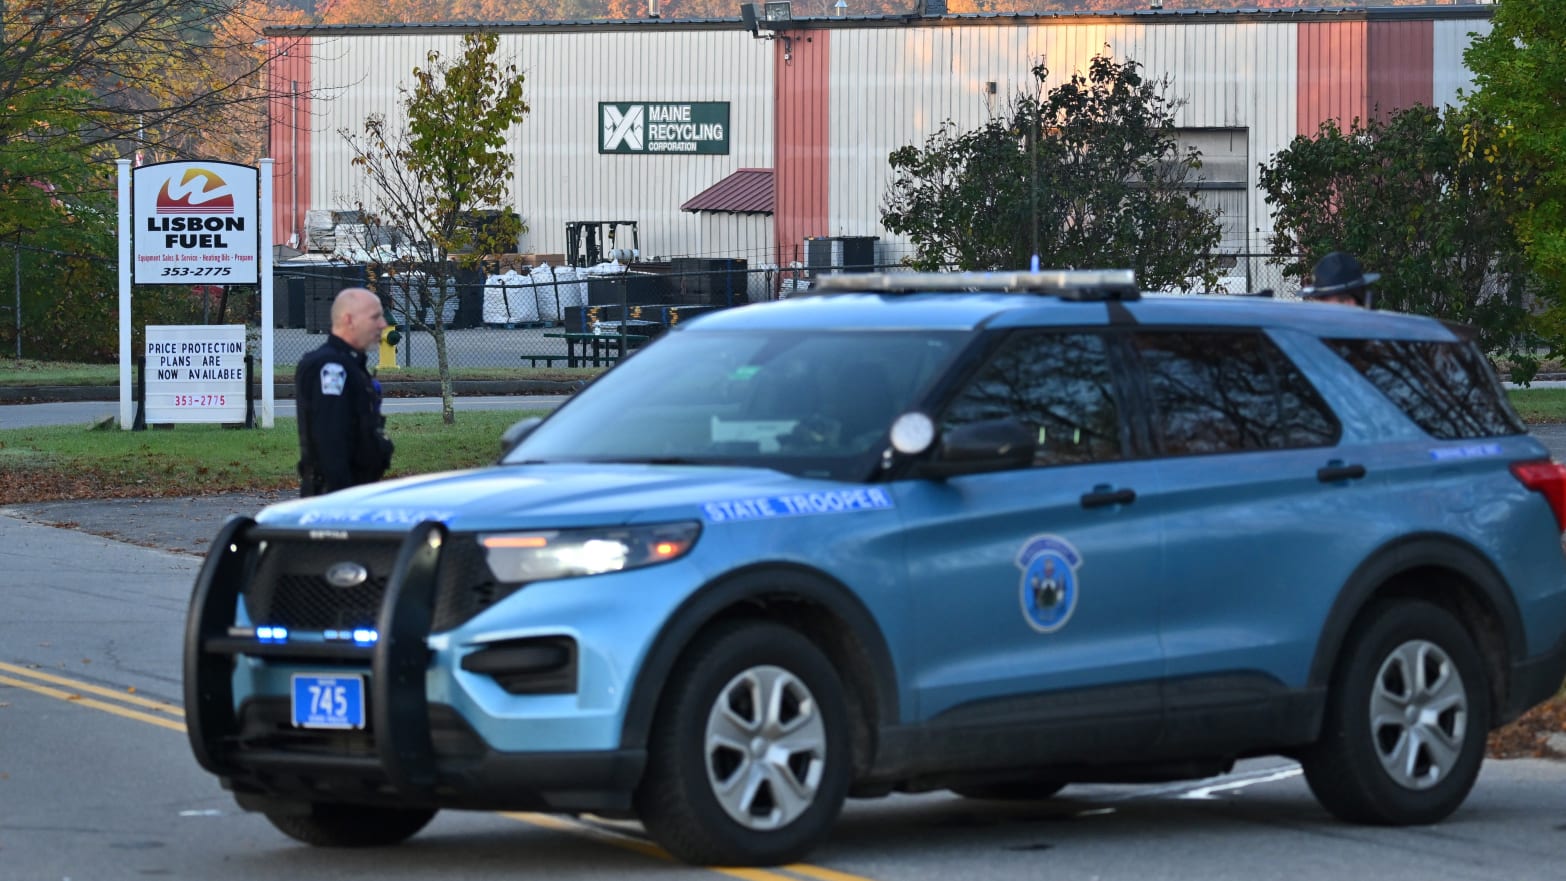 Police stand near the recycling plant where the body of suspected mass shooter Robert Card was found in Lisbon Falls, Maine.  